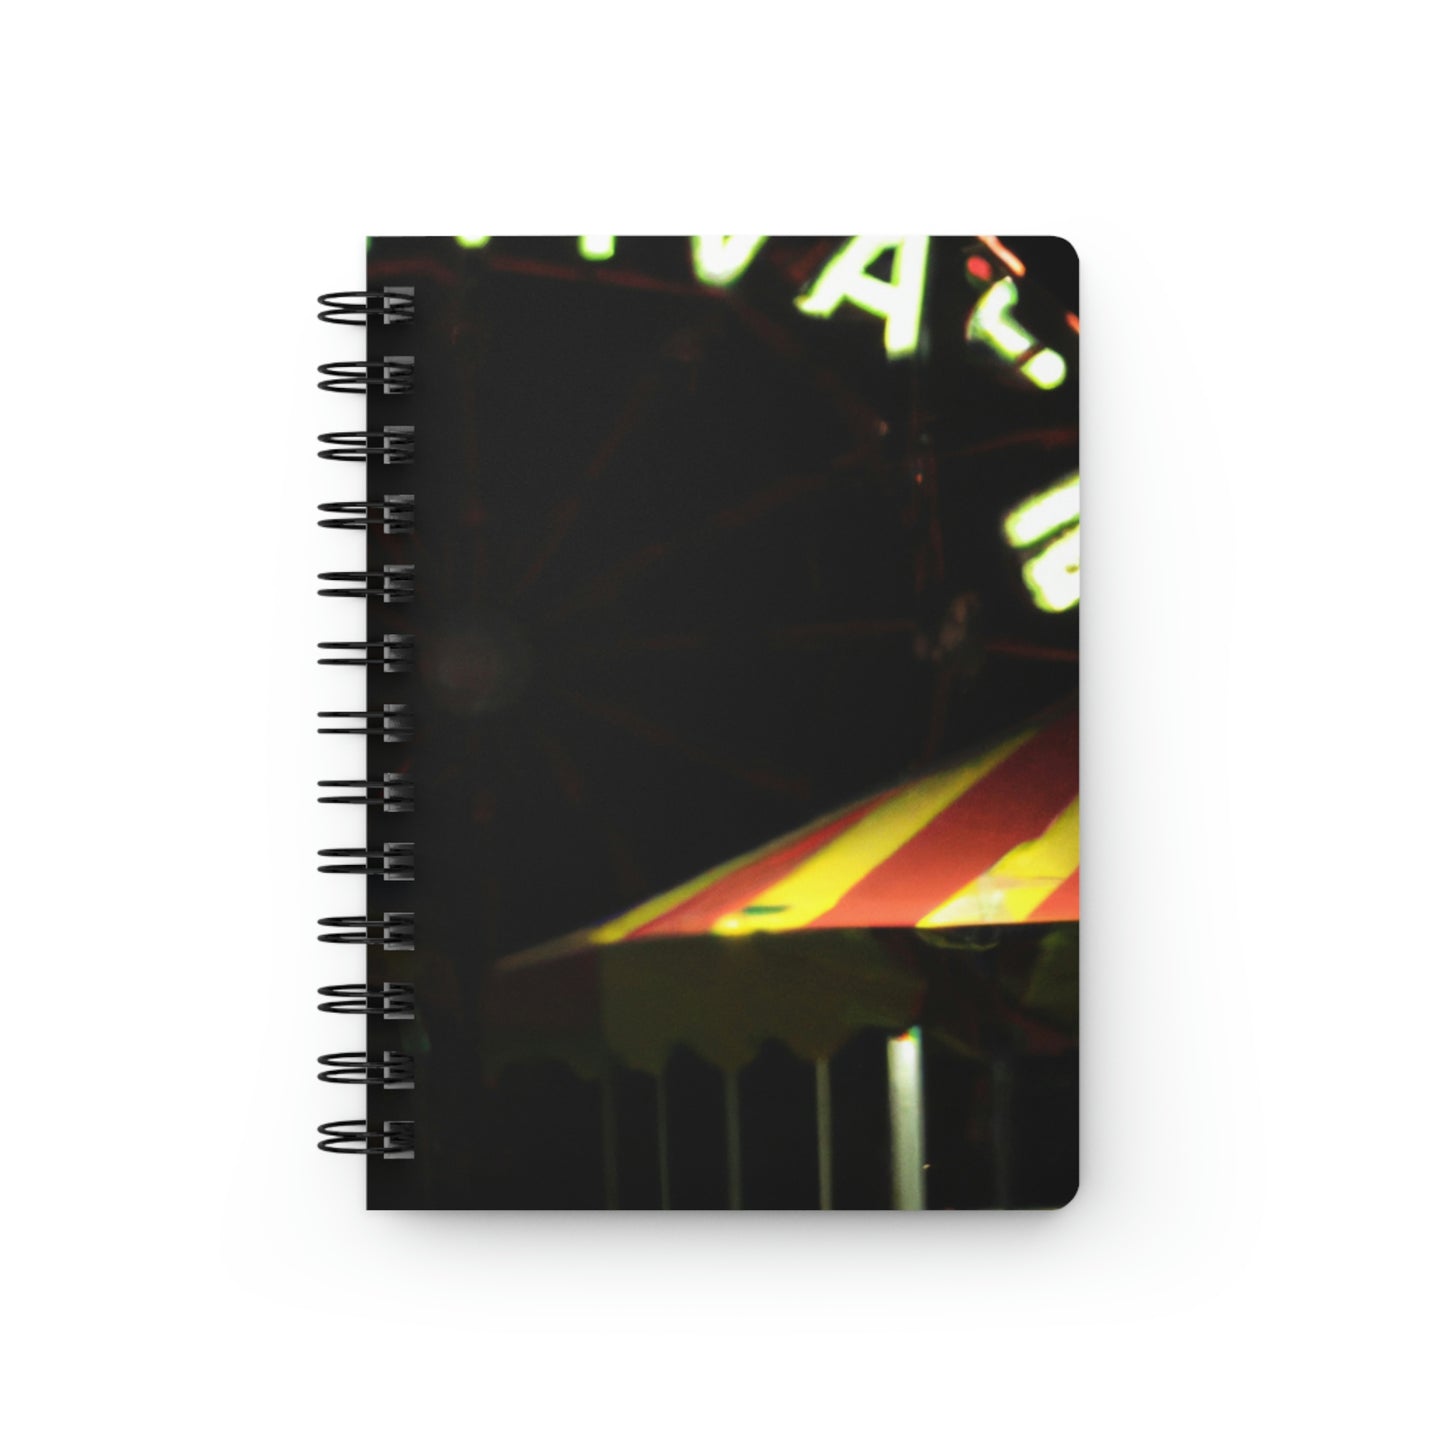 "The Wicked Summer Carnival" - The Alien Spiral Bound Journal